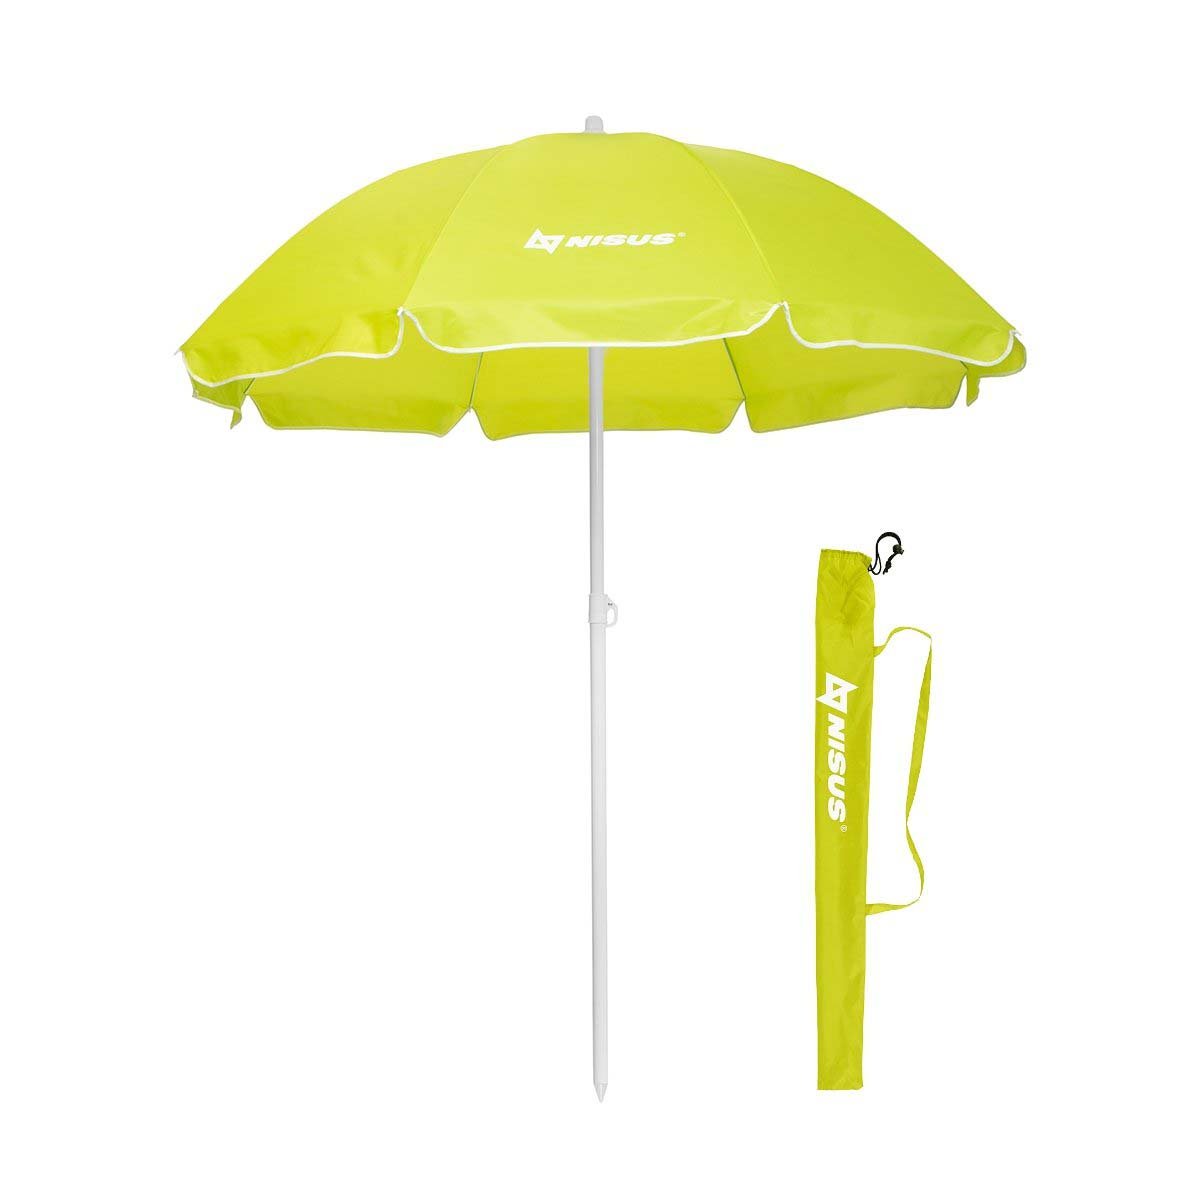 5, 6 ft Lime Green Folding Beach Umbrella with Carry Bag